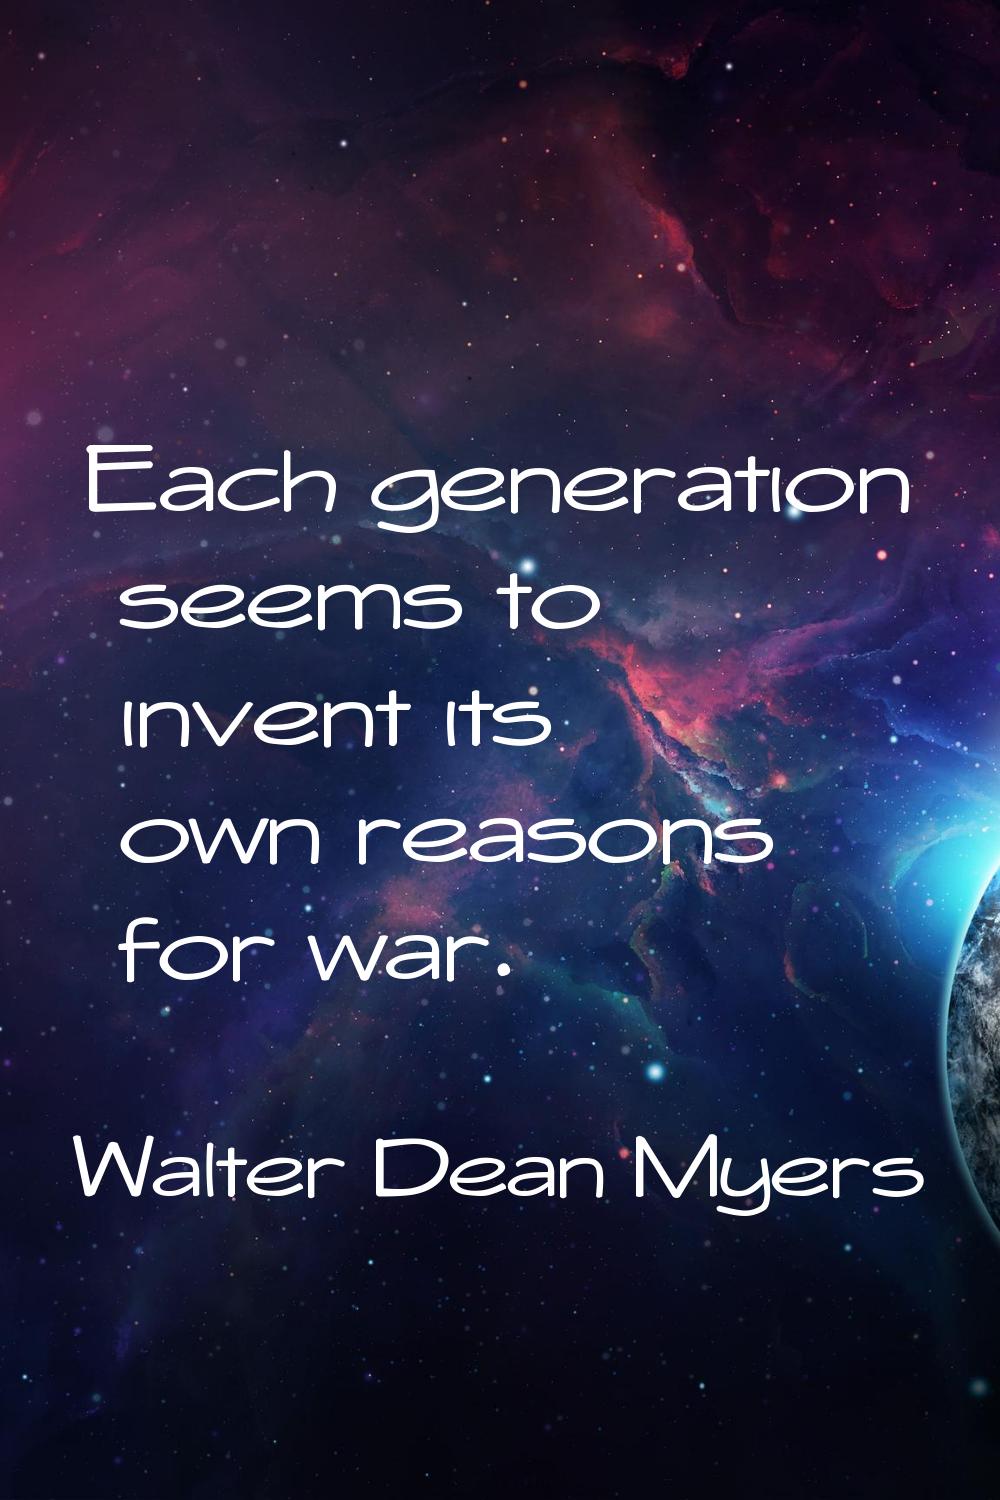 Each generation seems to invent its own reasons for war.